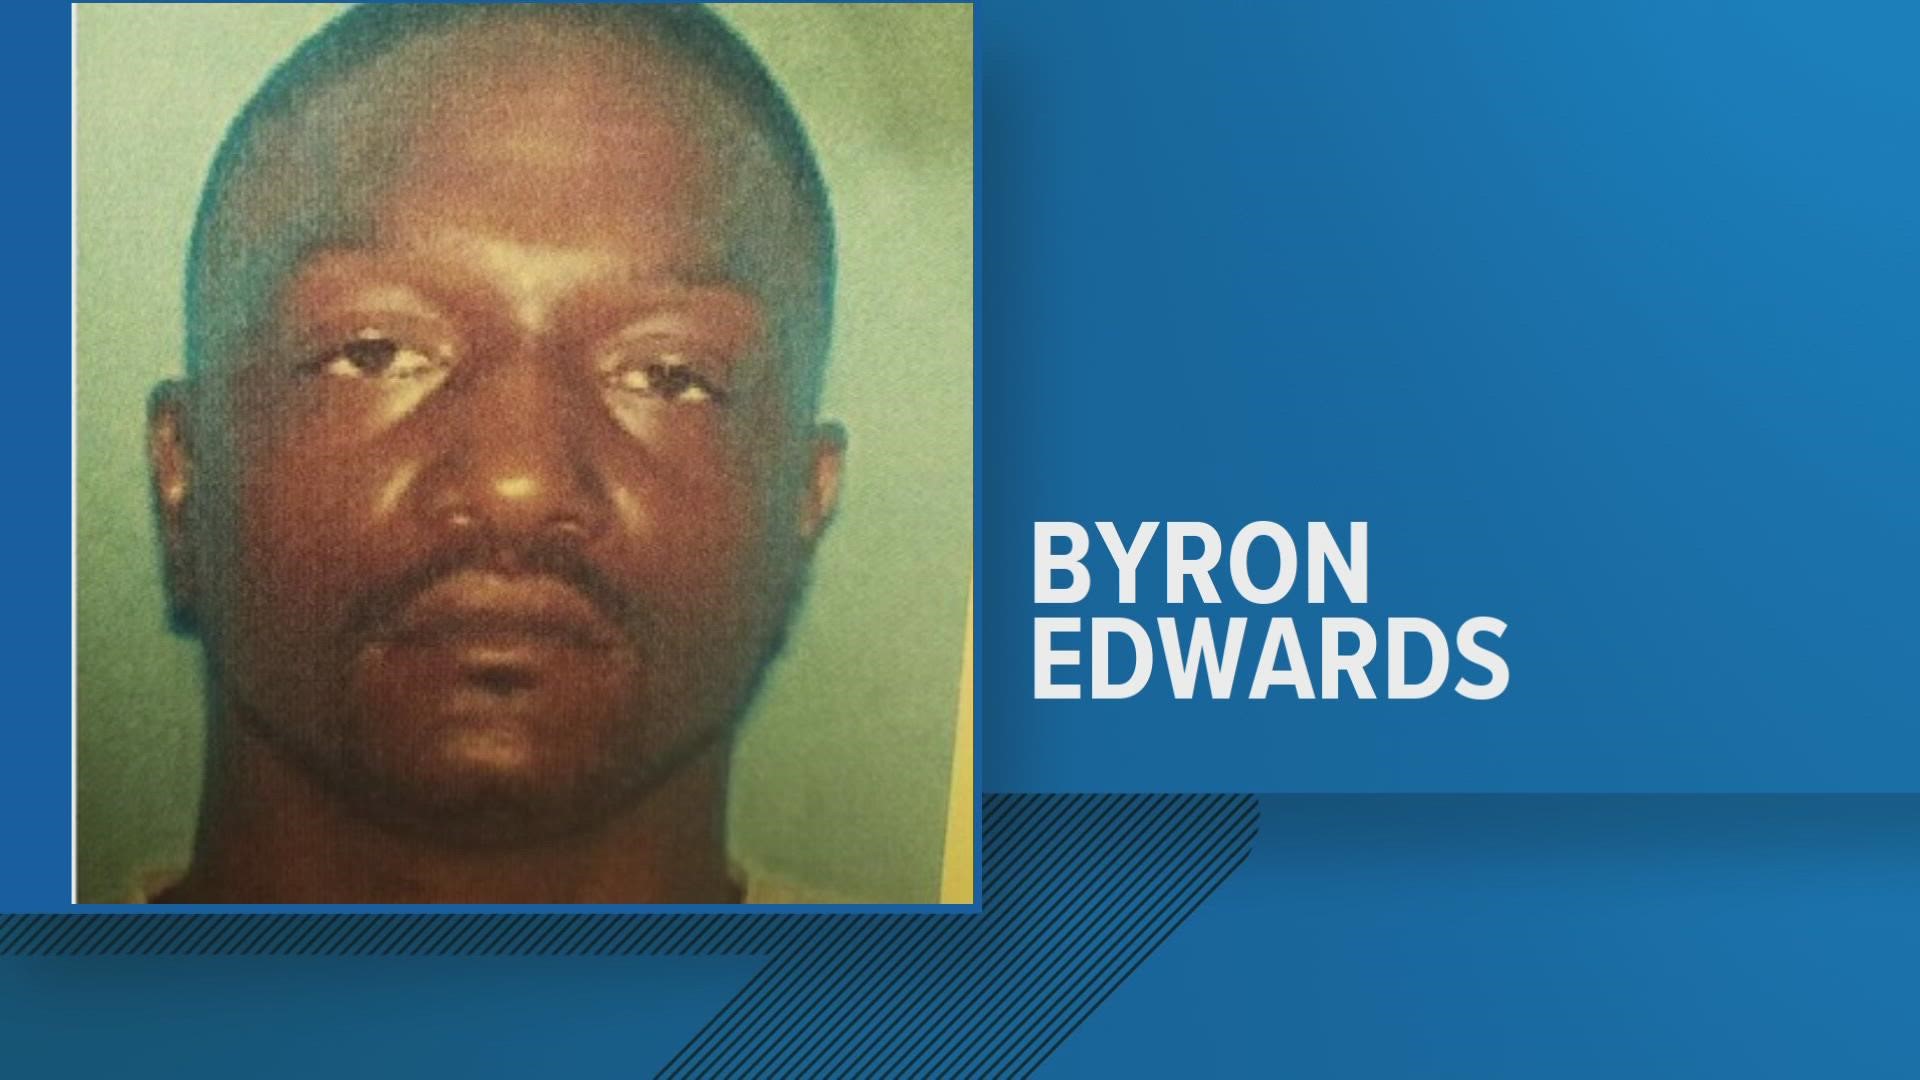 Byron Edwards vanished on March 20 and nobody knows what happened to him.